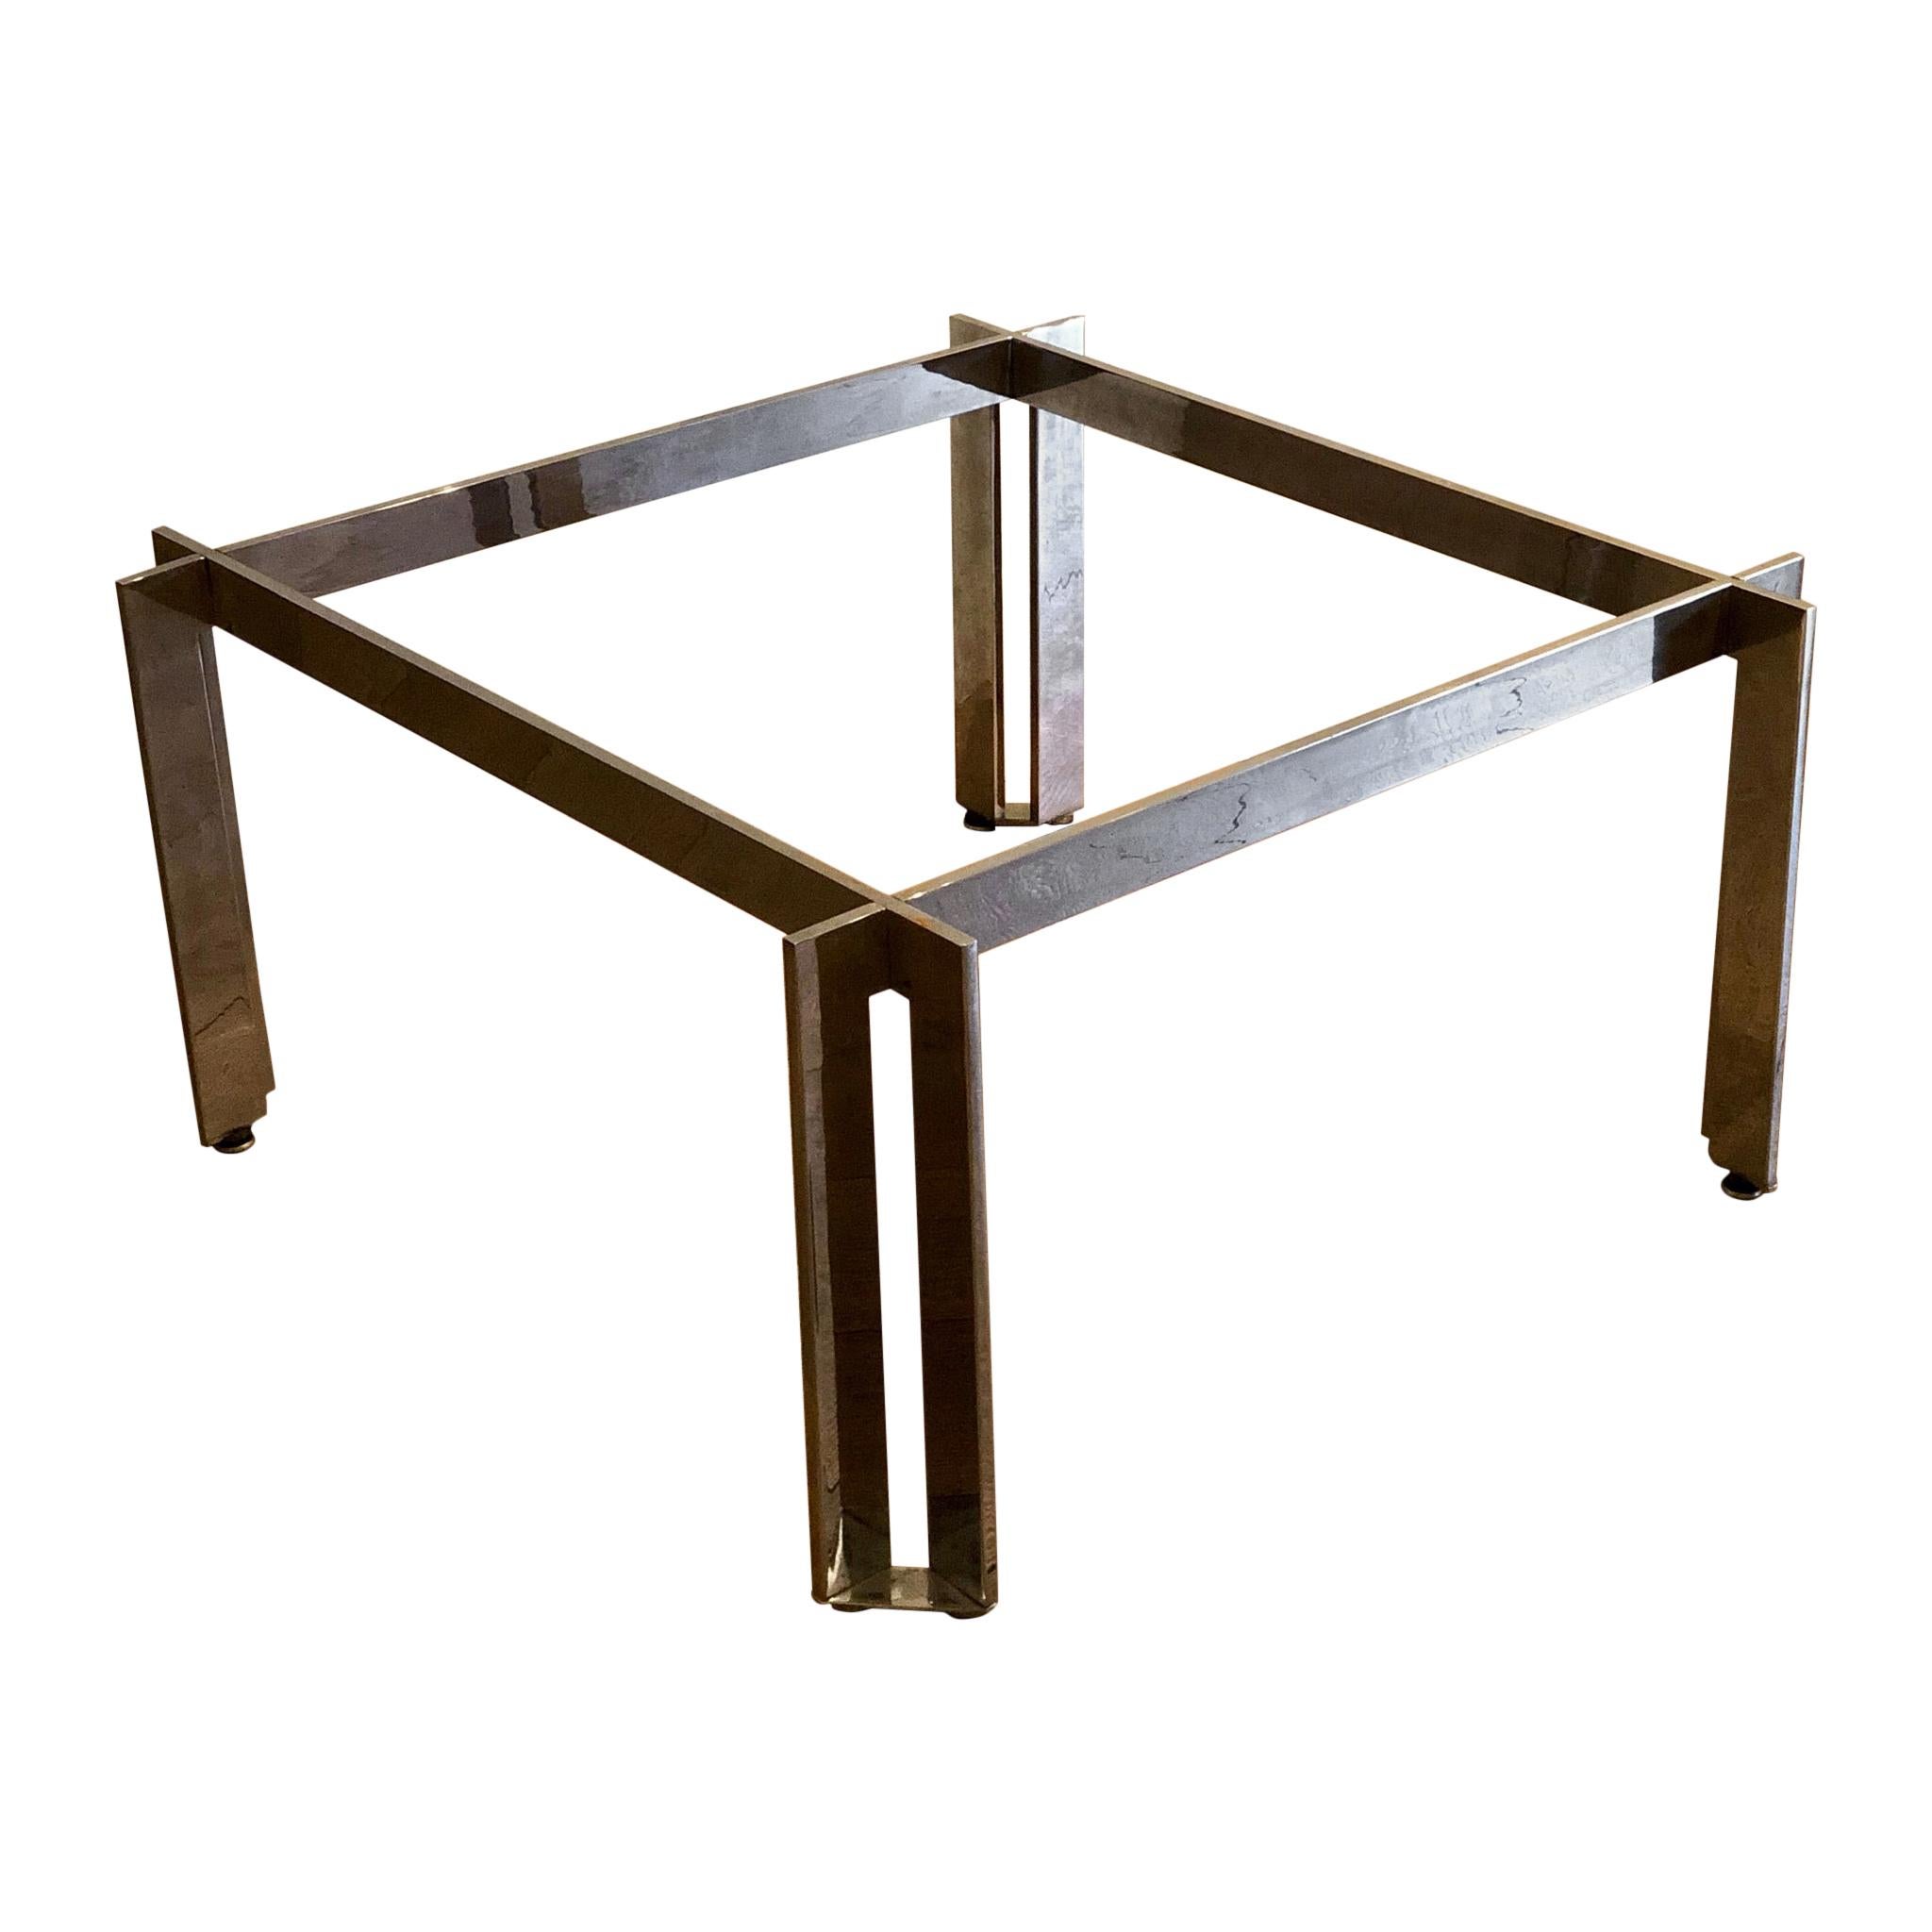 Modernist Midcentury Solid Steel Chrome Finish Square Coffee Table Base For Sale